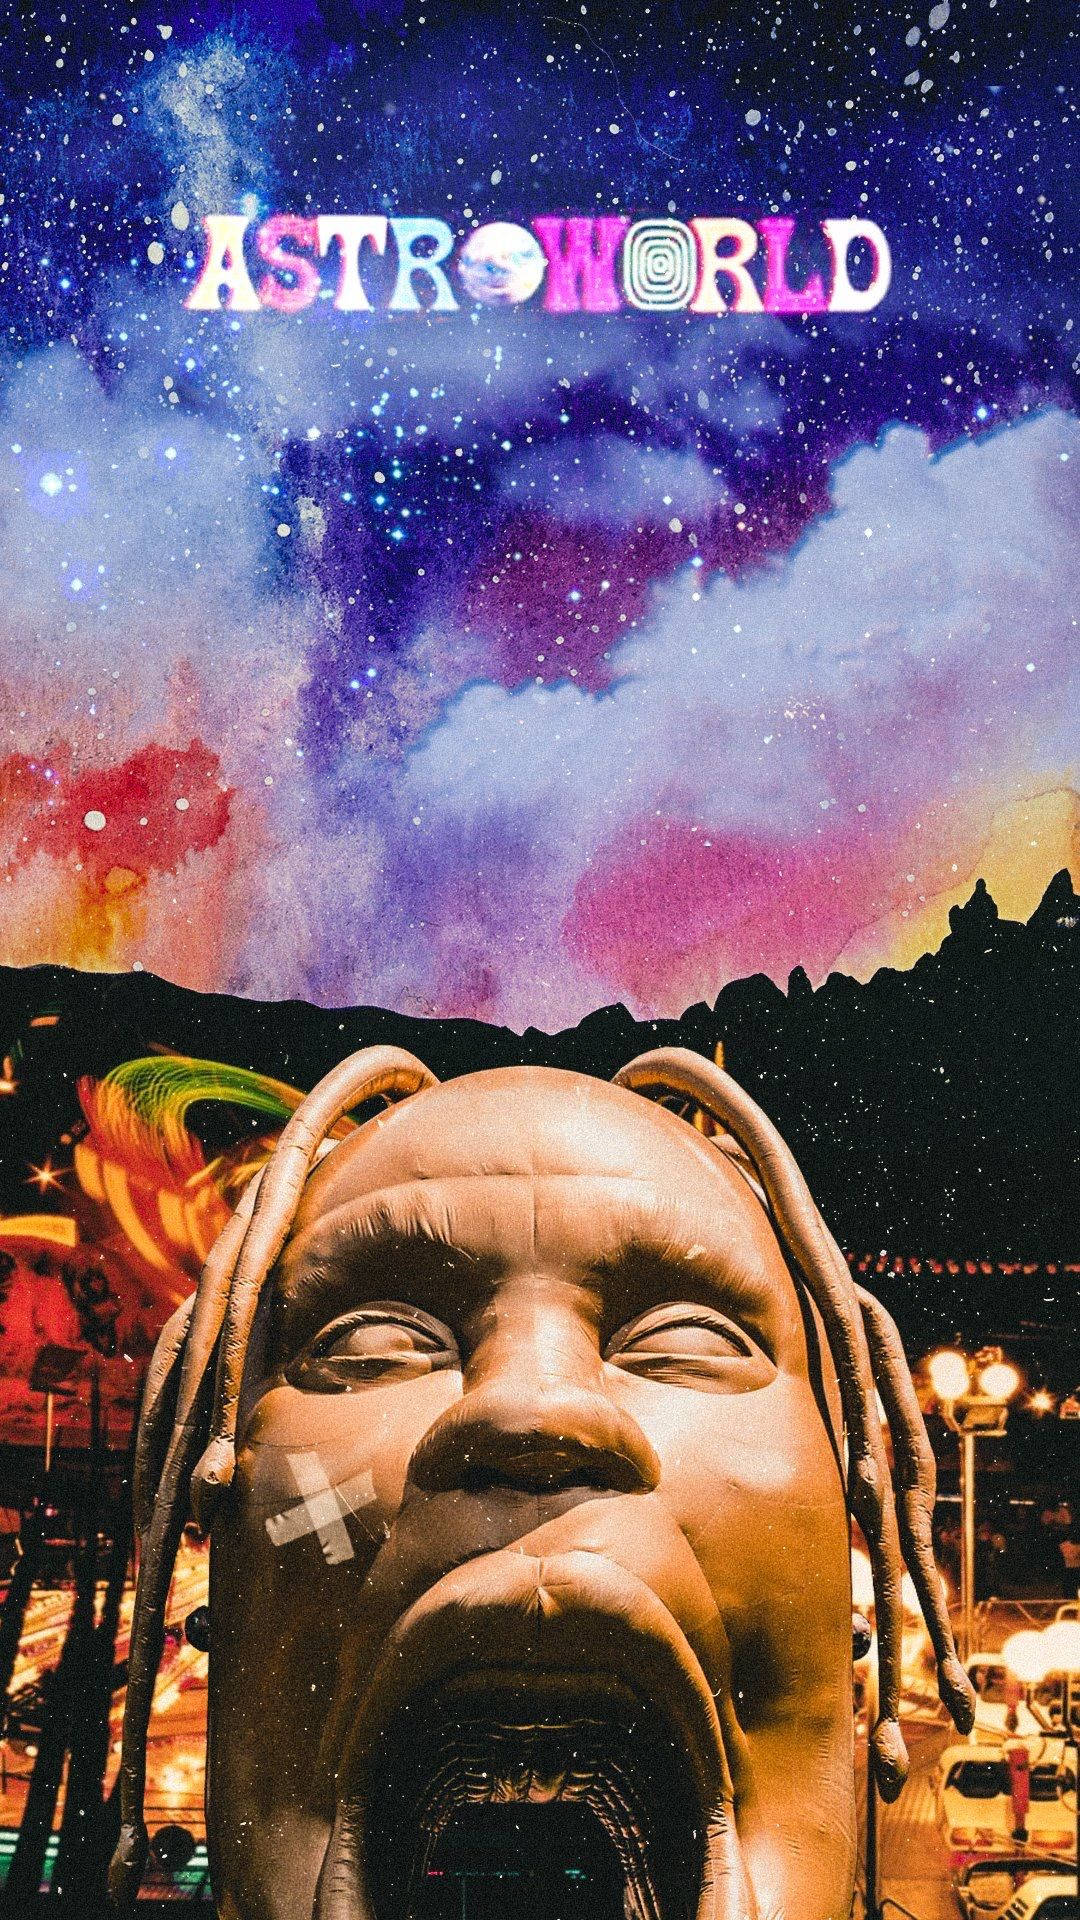 Witness The Cosmic Sound&Vibes Of Astroworld On Your Iphone Wallpaper